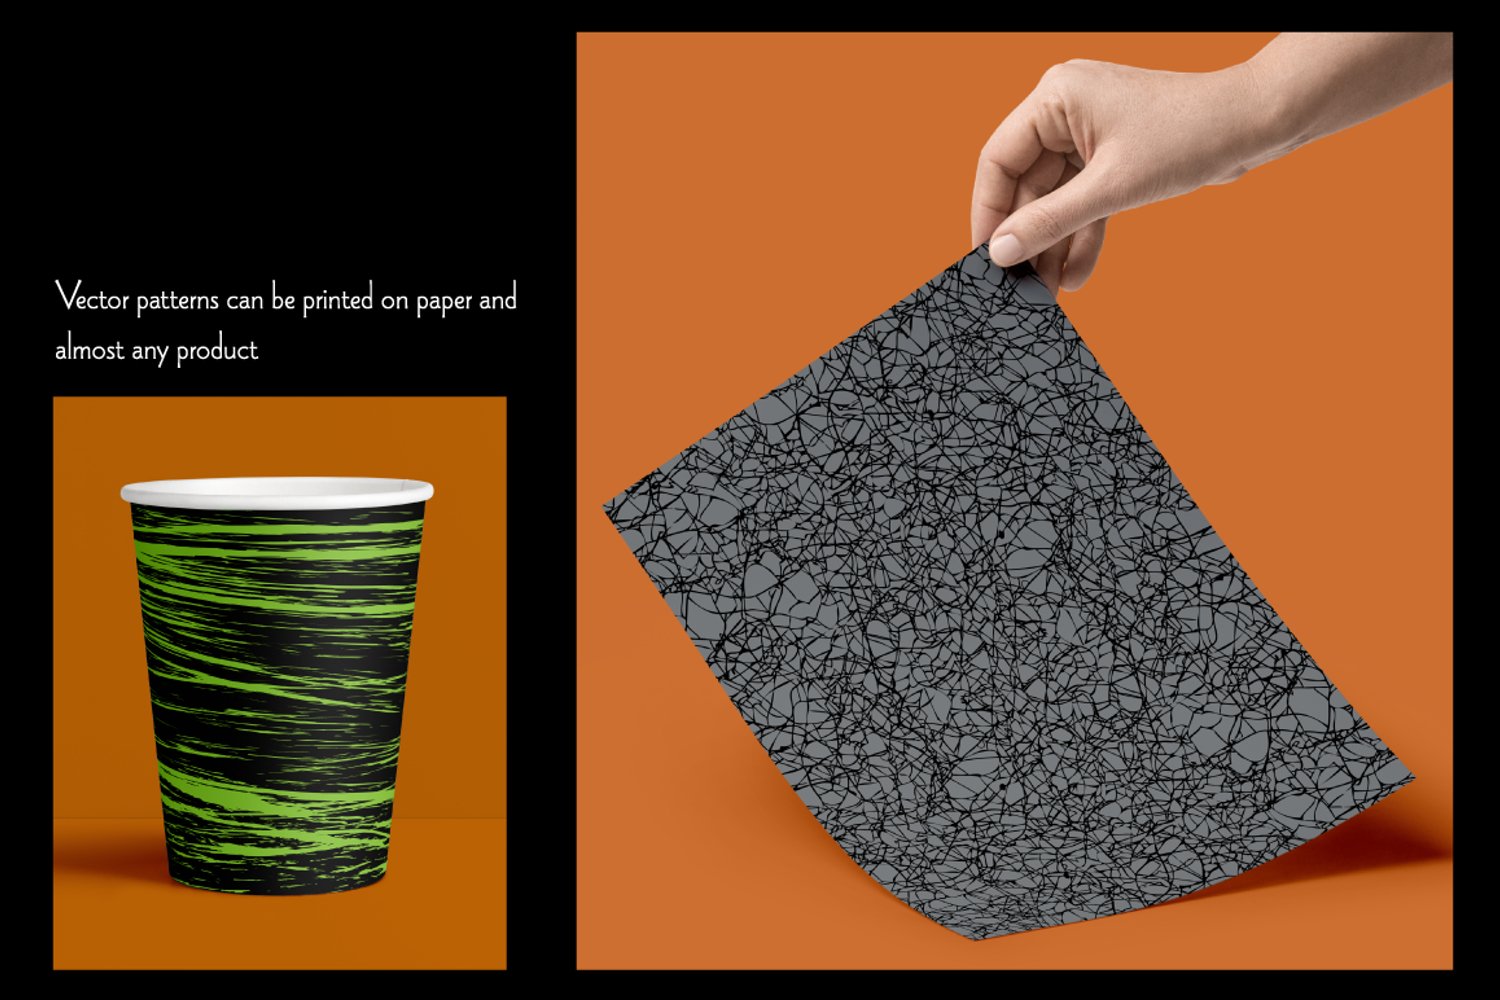 Vector patterns can be printed on paper and almost any product.